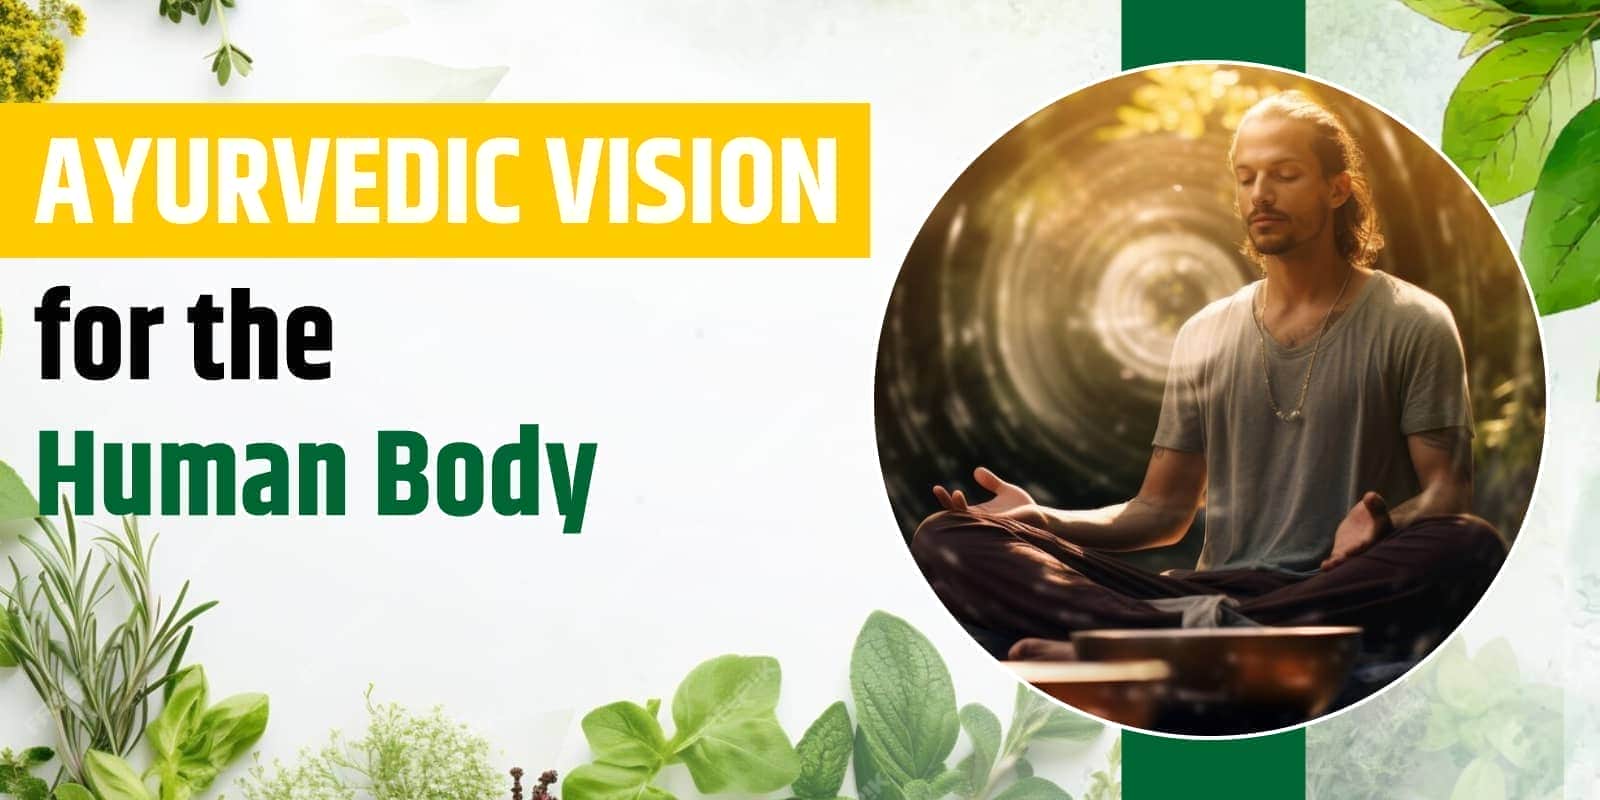 Ayurvedic Vision for the Human Body